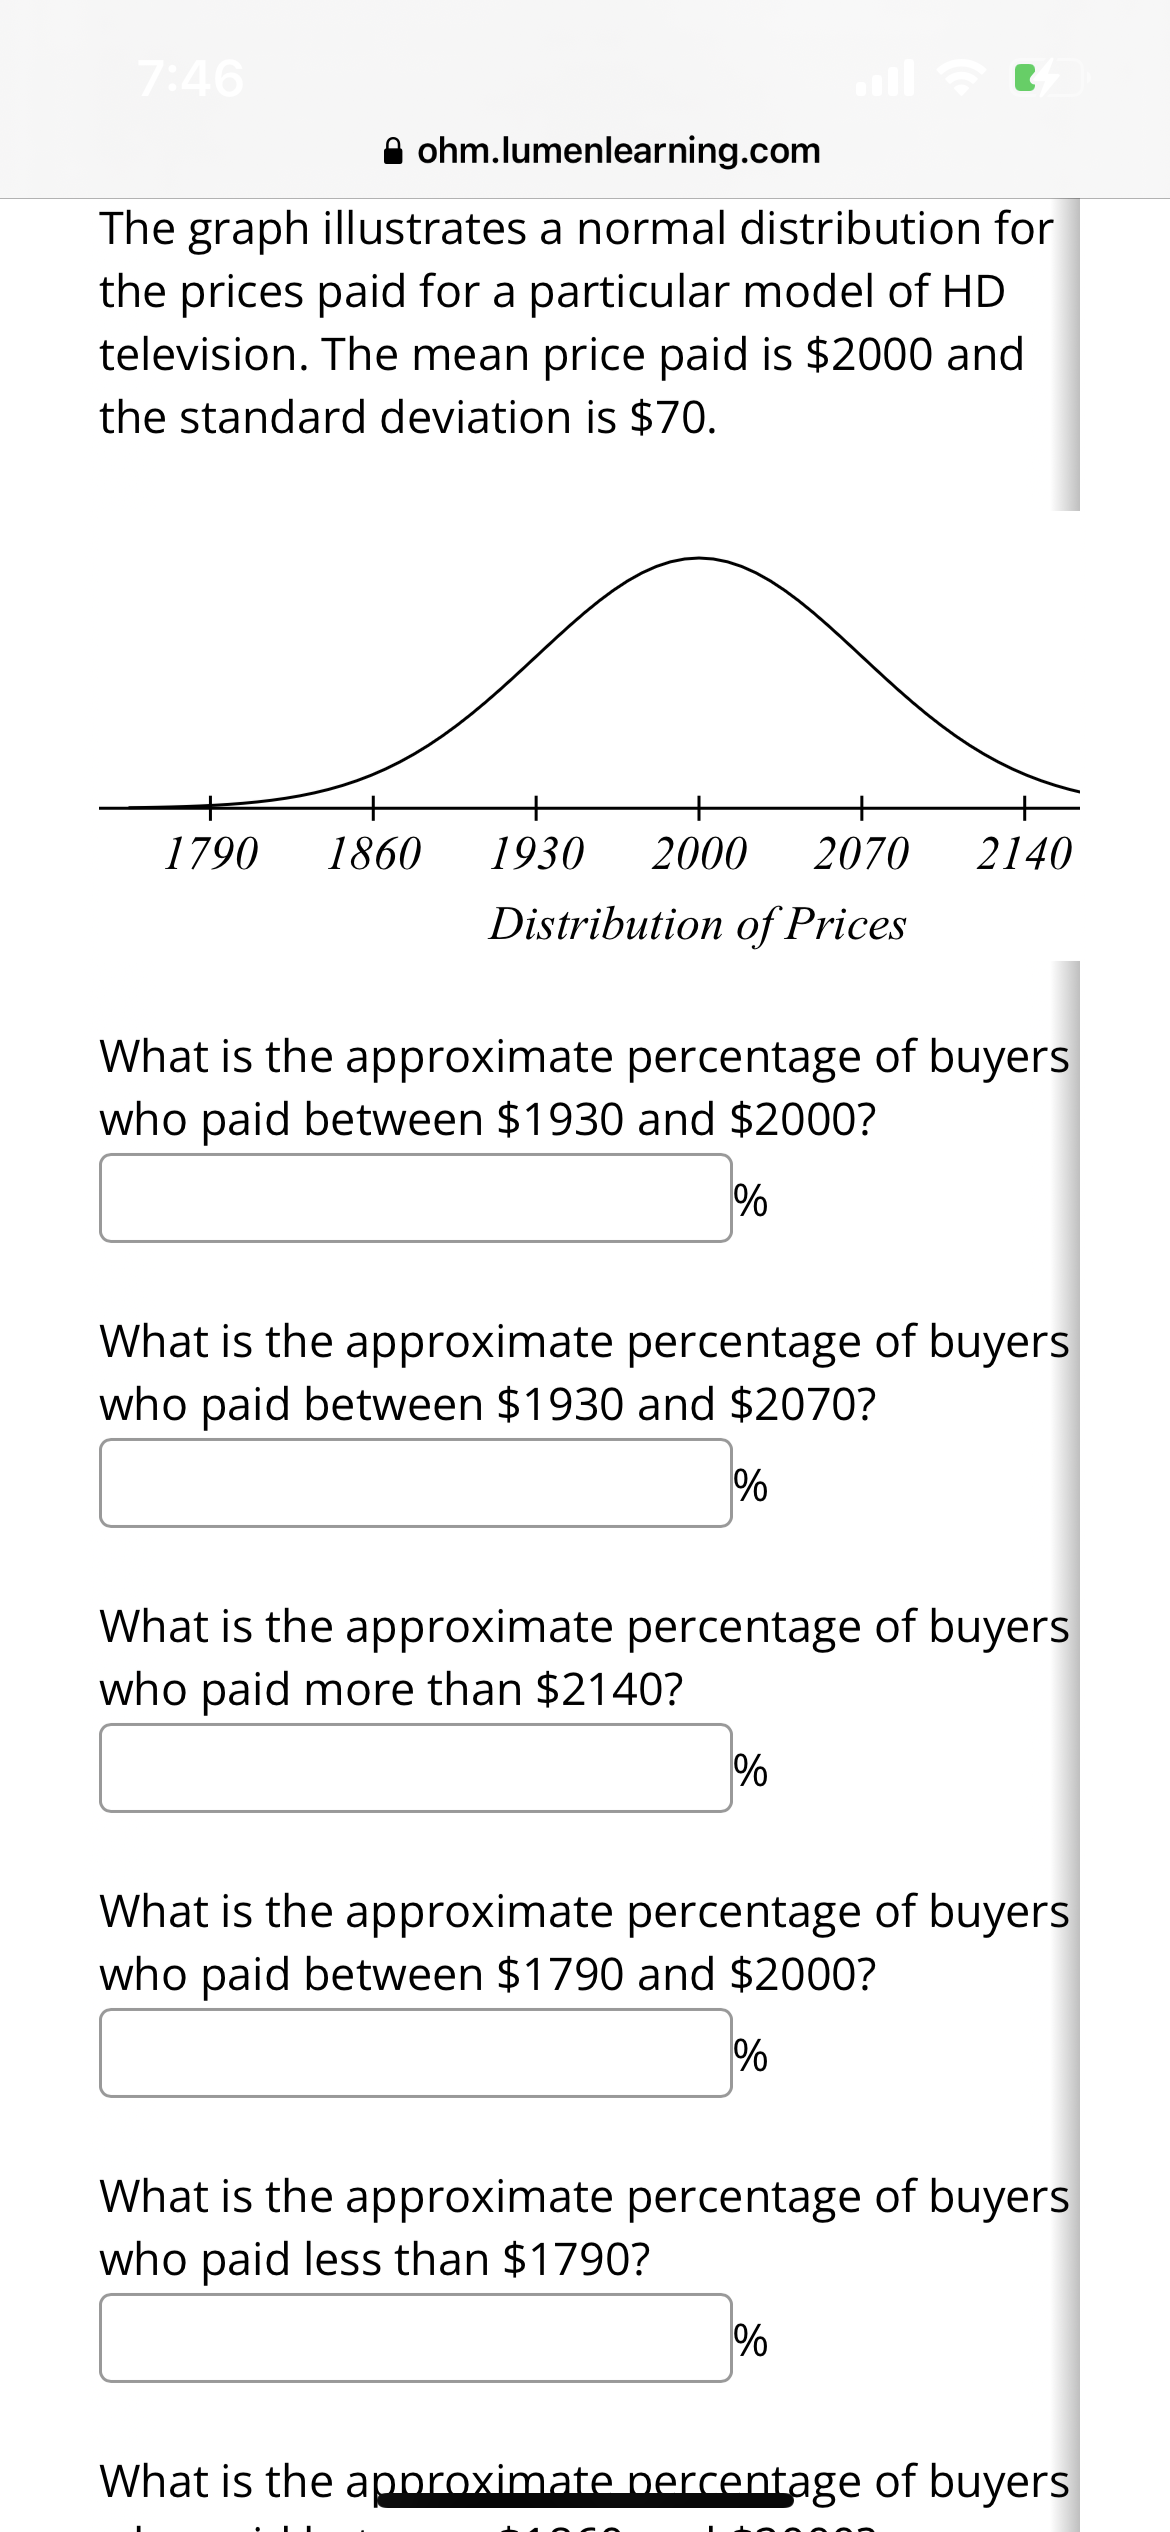 7:46
ohm.lumenlearning.com
The graph illustrates a normal distribution for
the prices paid for a particular model of HD
television. The mean price paid is $2000 and
the standard deviation is $70.
1790 1860
1930 2000 2070 2140
Distribution of Prices
What is the approximate percentage of buyers
who paid between $1930 and $2000?
%
What is the approximate percentage of buyers
who paid between $1930 and $2070?
%
What is the approximate percentage of buyers
who paid more than $2140?
%
What is the approximate percentage of buyers
who paid between $1790 and $2000?
%
What is the approximate percentage of buyers
who paid less than $1790?
%
What is the approximate percentage of buyers